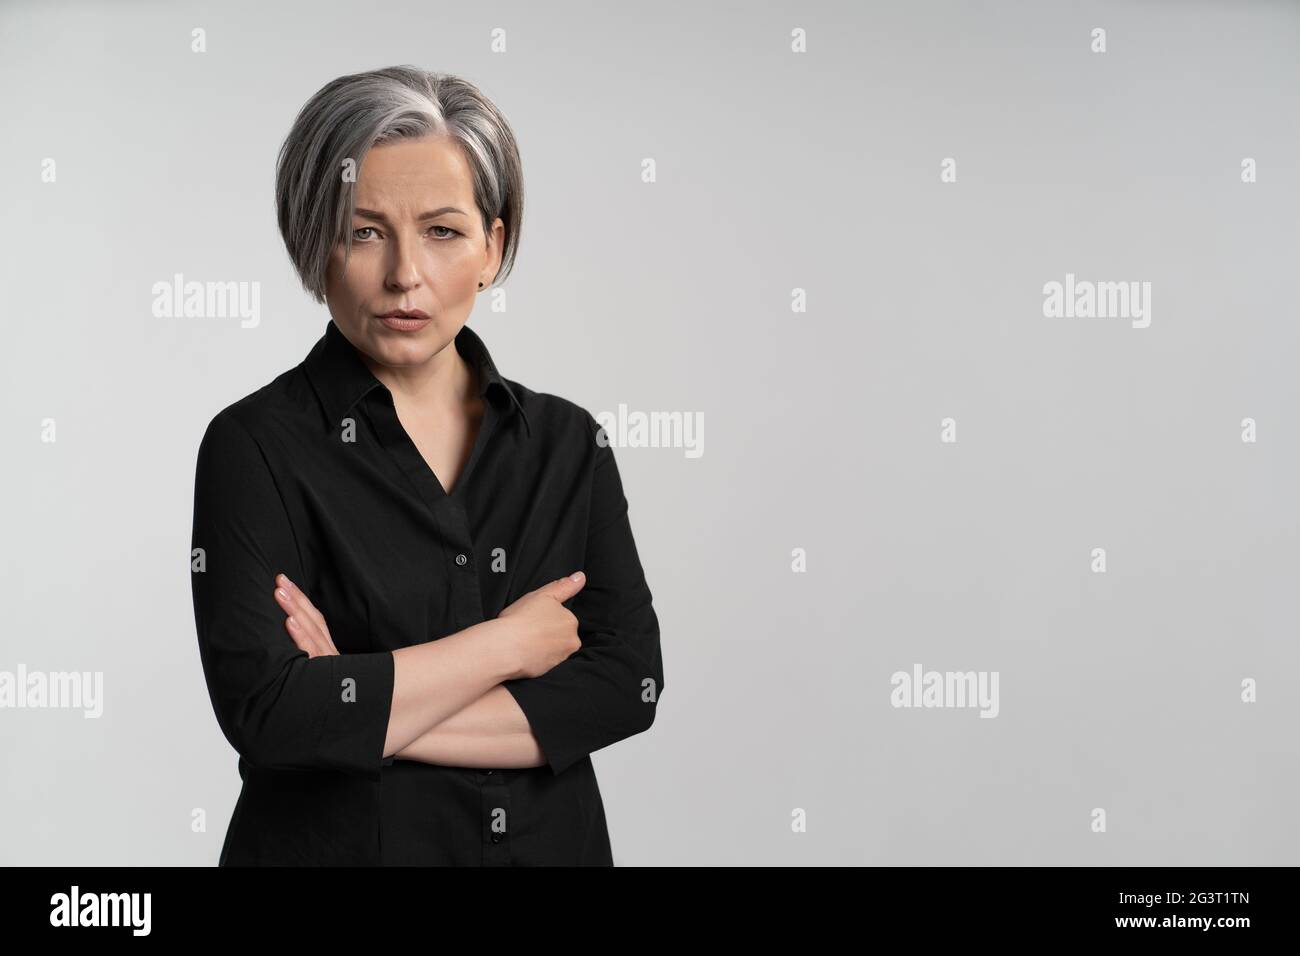 Mature woman with gray hair In black shirt folded her arms on her chest against a white background. copy space at right. Stock Photo